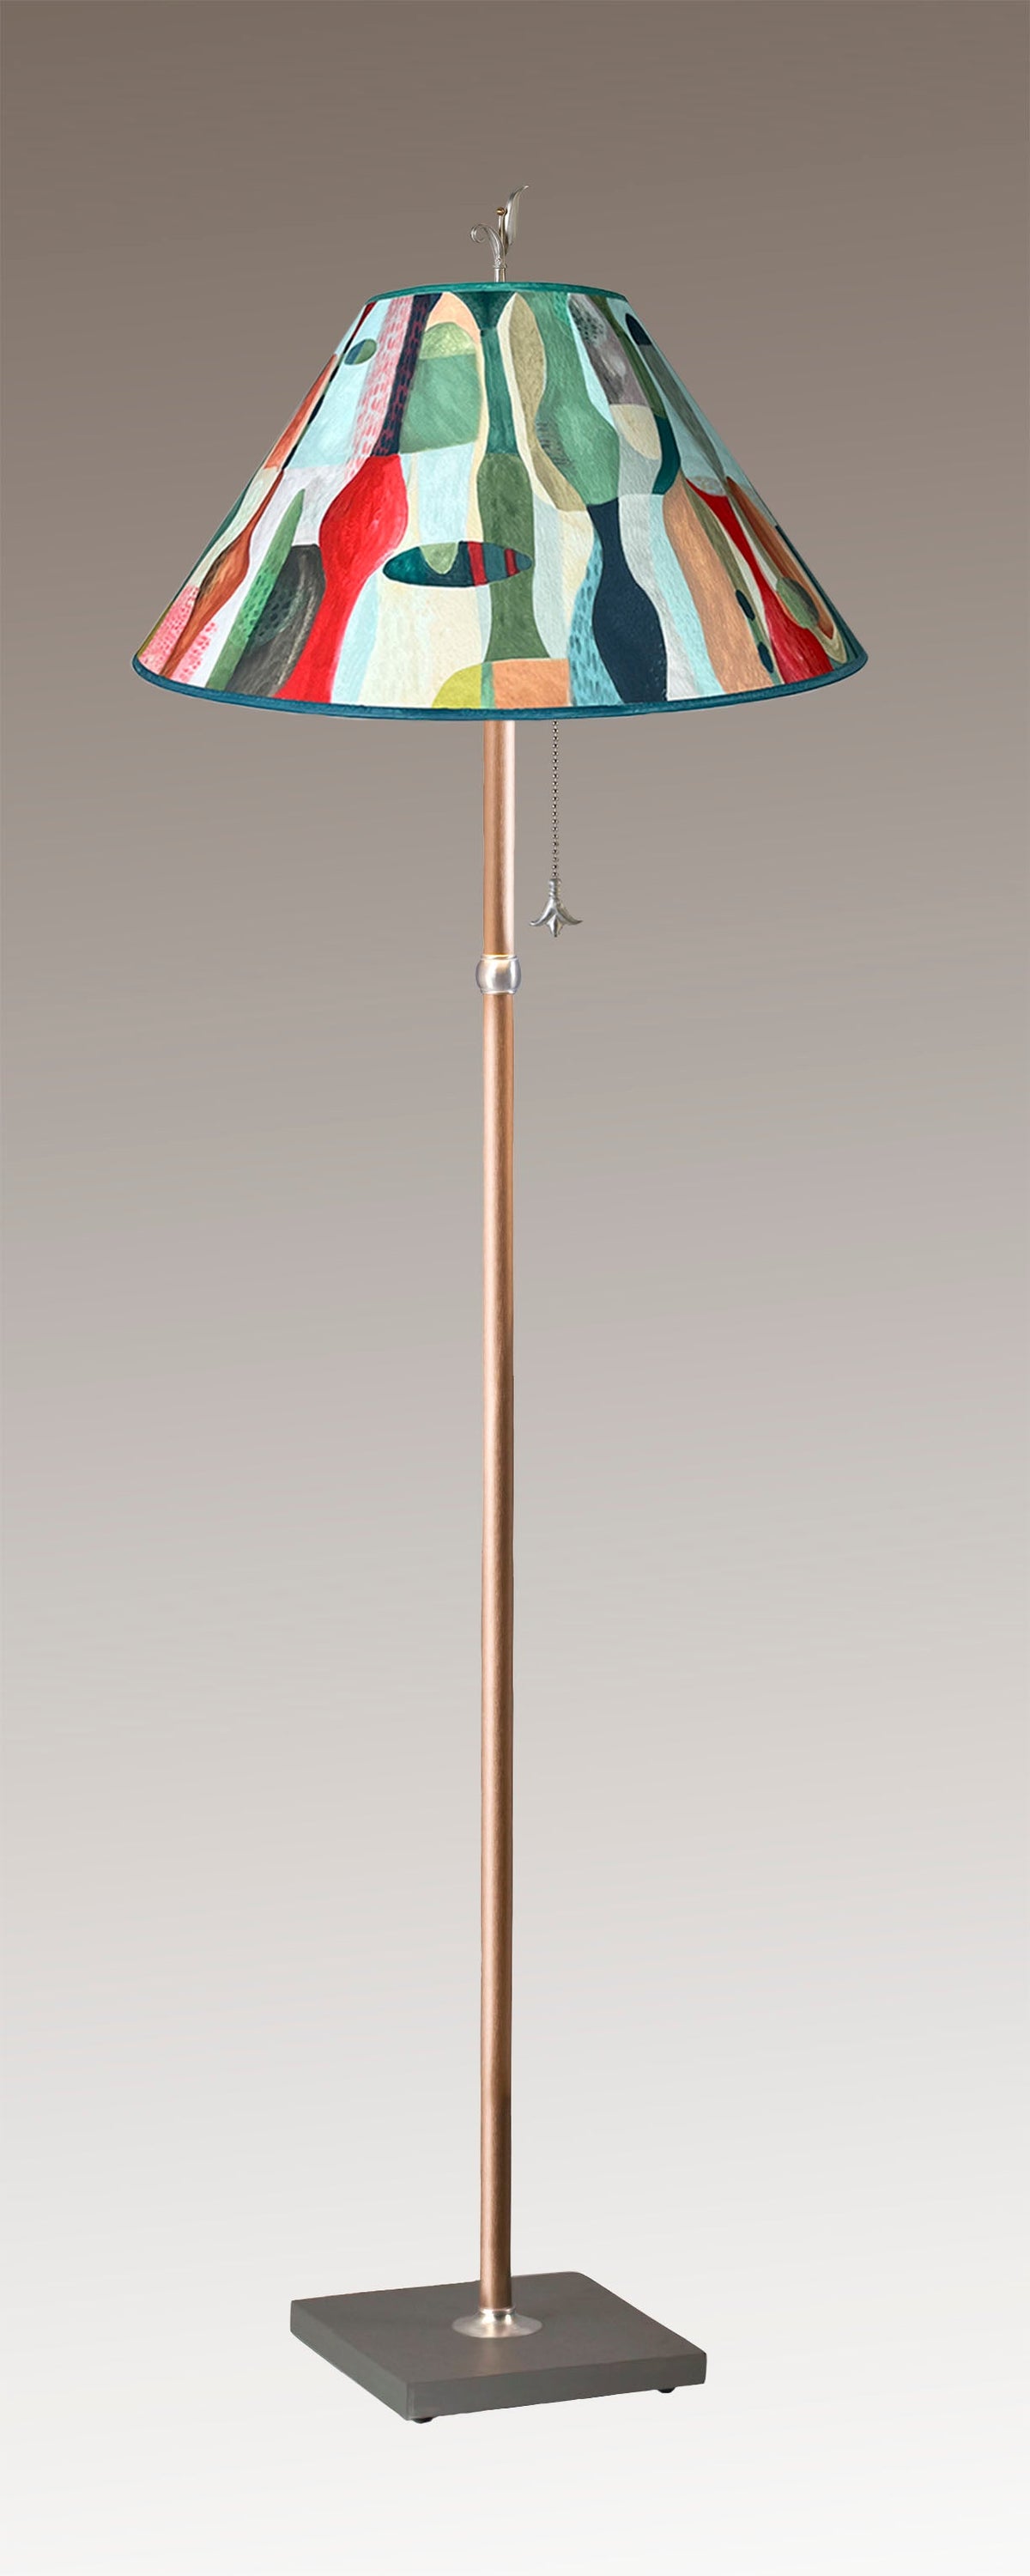 Janna Ugone &amp; Co Floor Lamp Copper Floor Lamp with Large Conical Shade in Riviera in Poppy